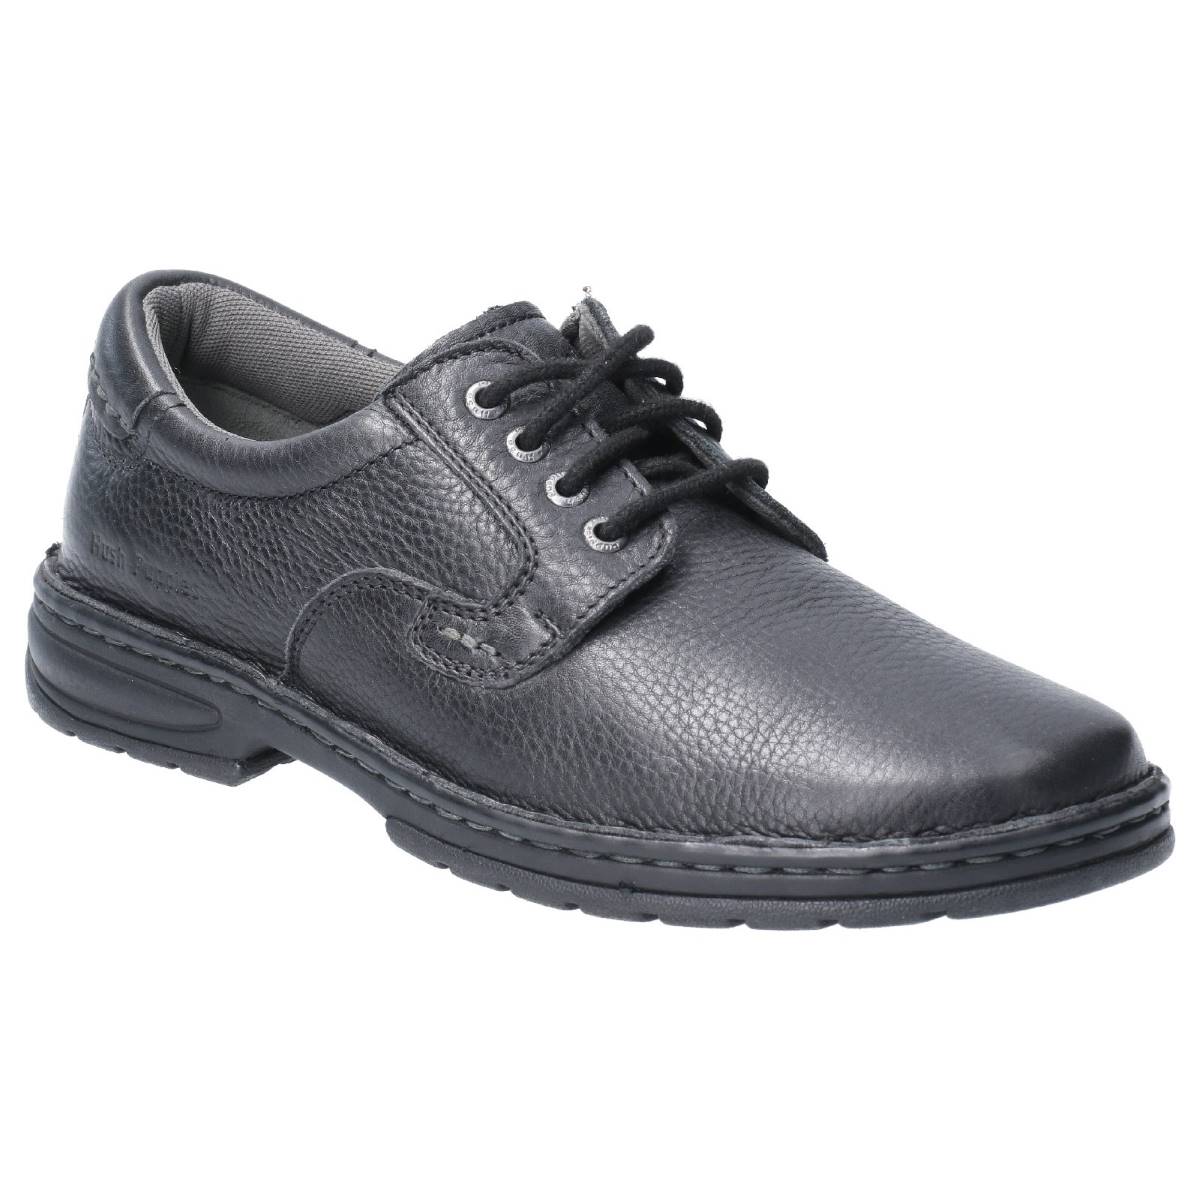 Hush Puppies Outlaw Ii Black Mens comfort shoes HPM2000-61-1 in a Plain Leather in Size 6